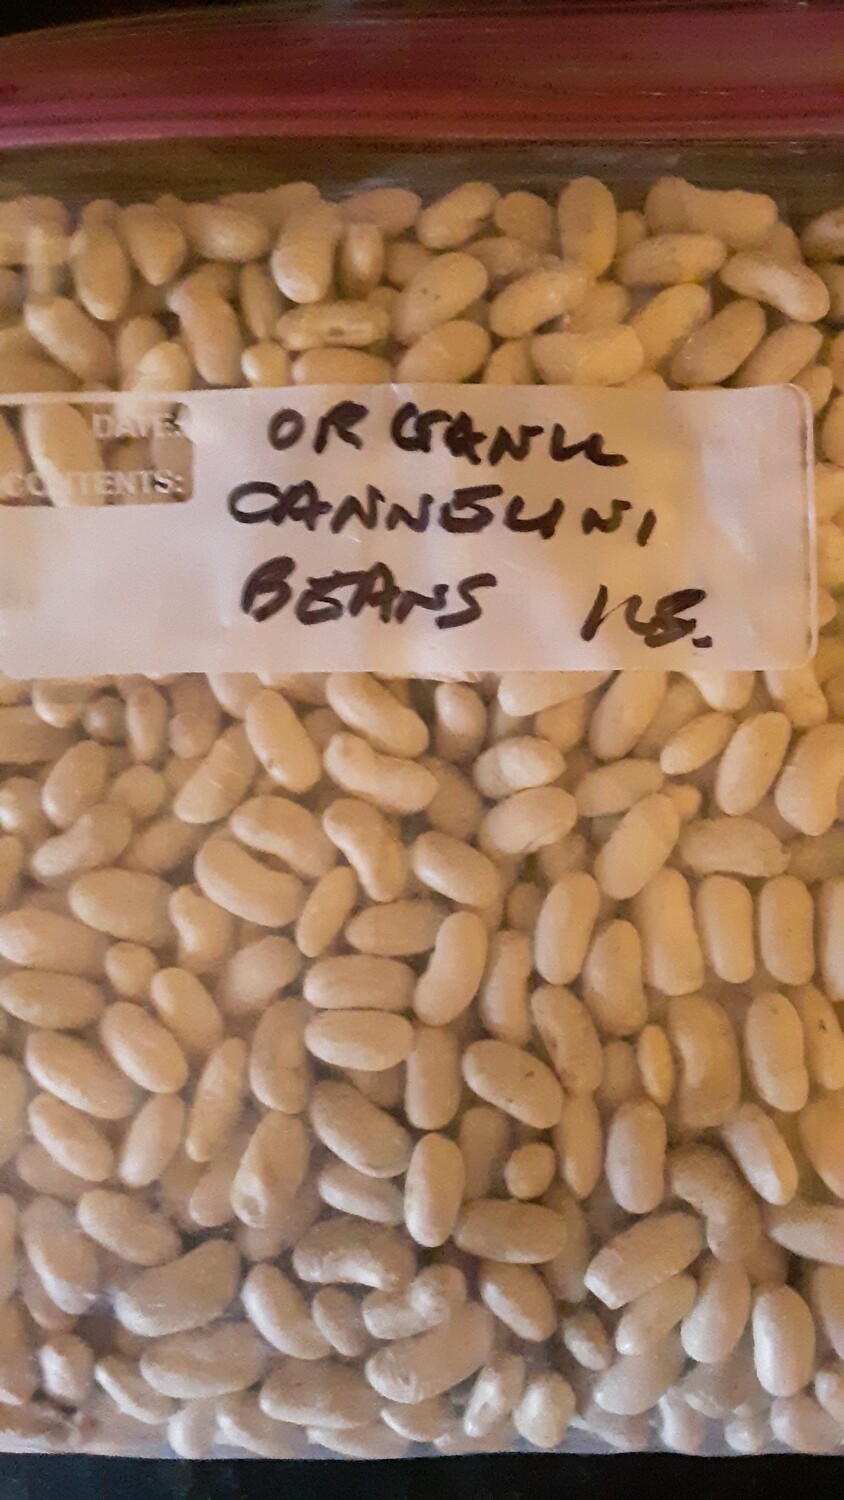 Genesee Valley Bean organic cannellini beans, 1 lb